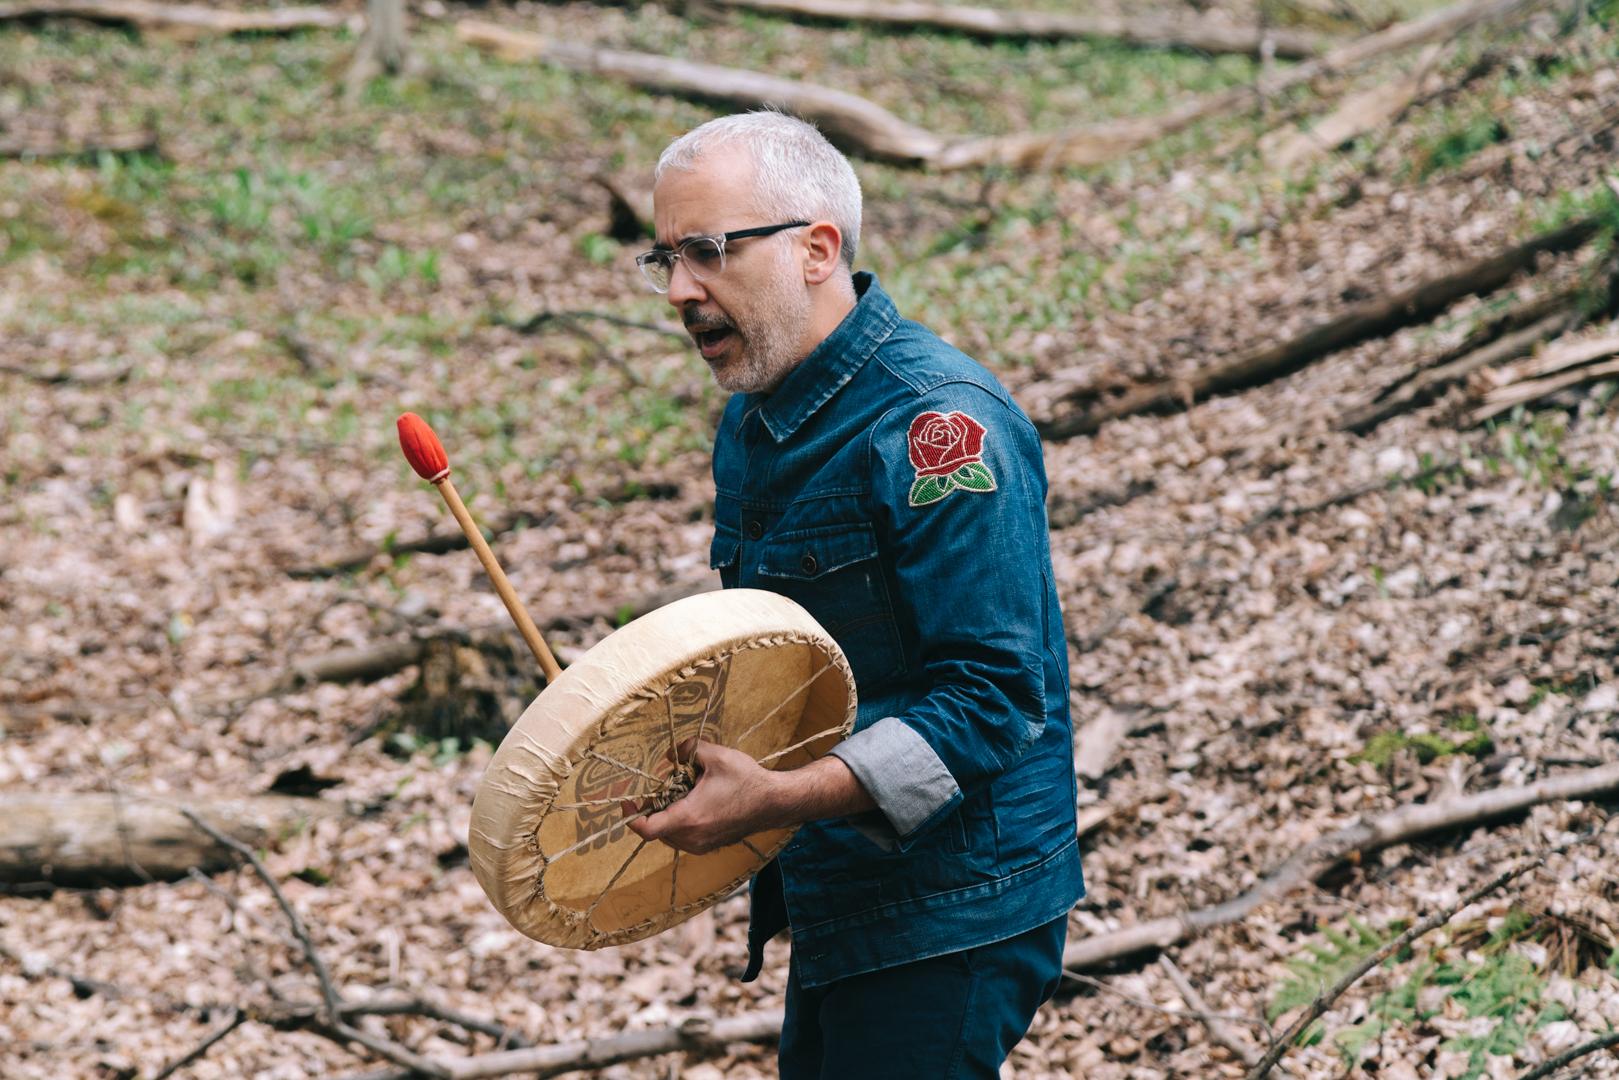 Peter Morin stands in the forest wearing a denim jacket with a beaded rose patch on his shoulder. He holds a rawhide hand drum in one hand and a drumstick in the other, his mouth open in song.